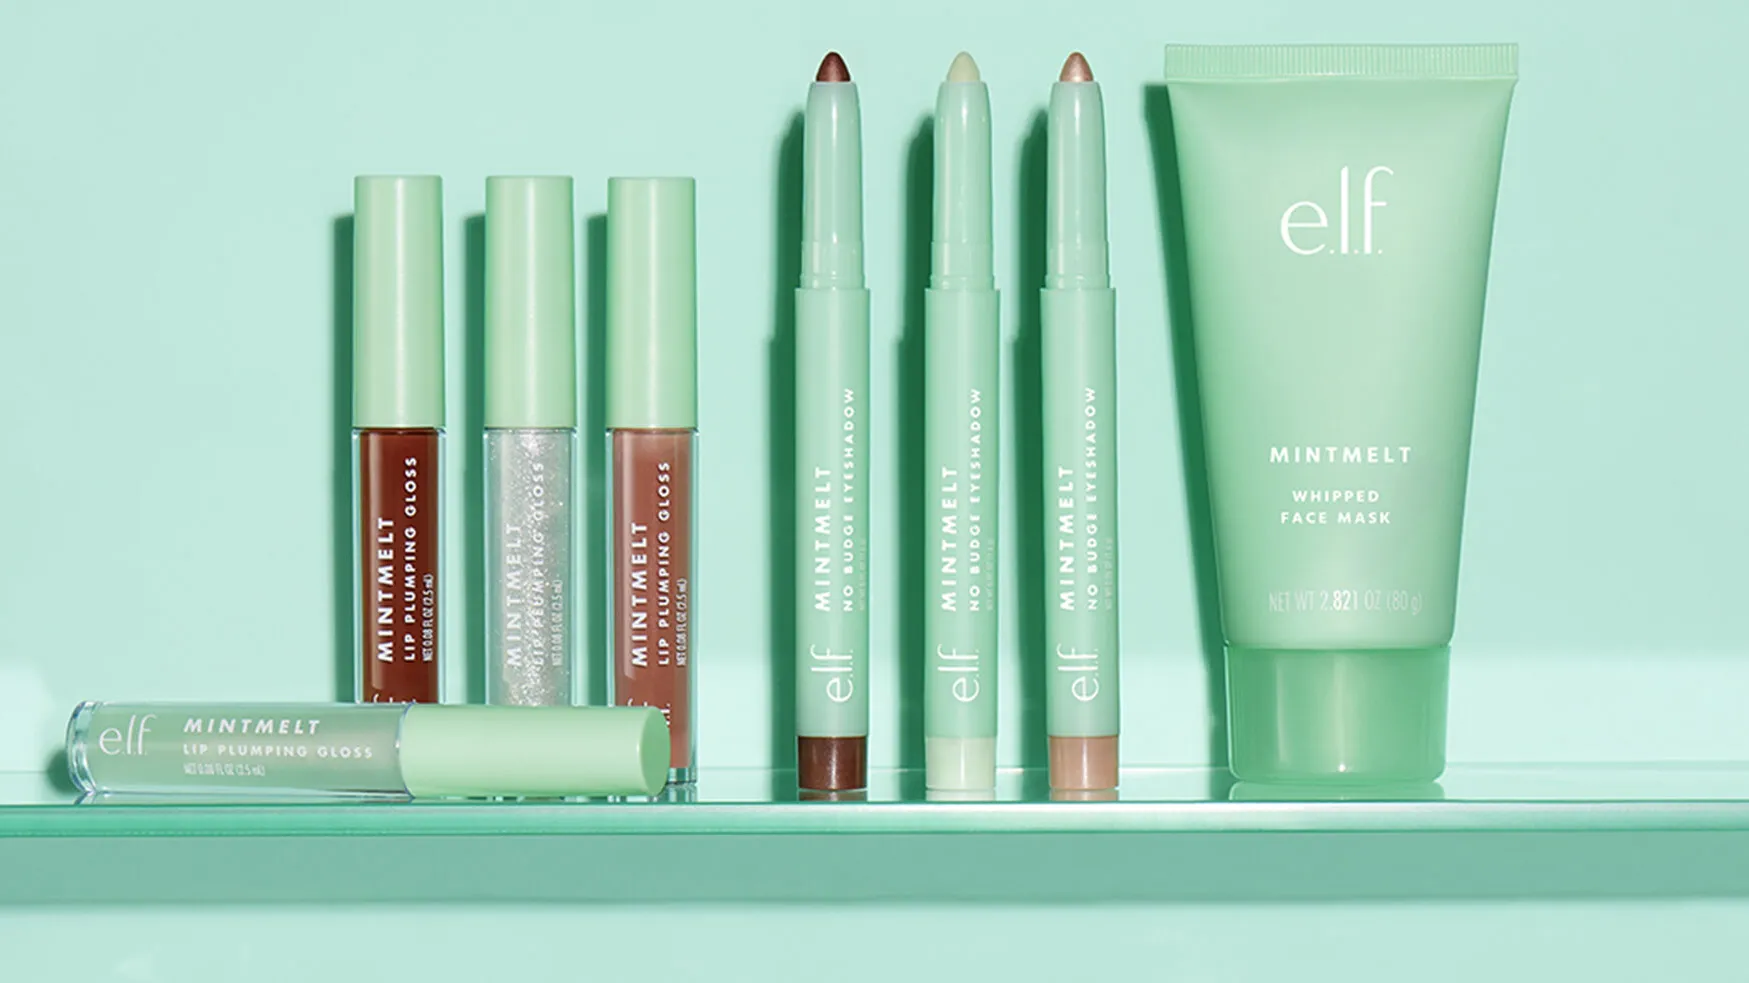 Plumping Gloss: Know More About The E.l.f. Lip Plumping Gloss